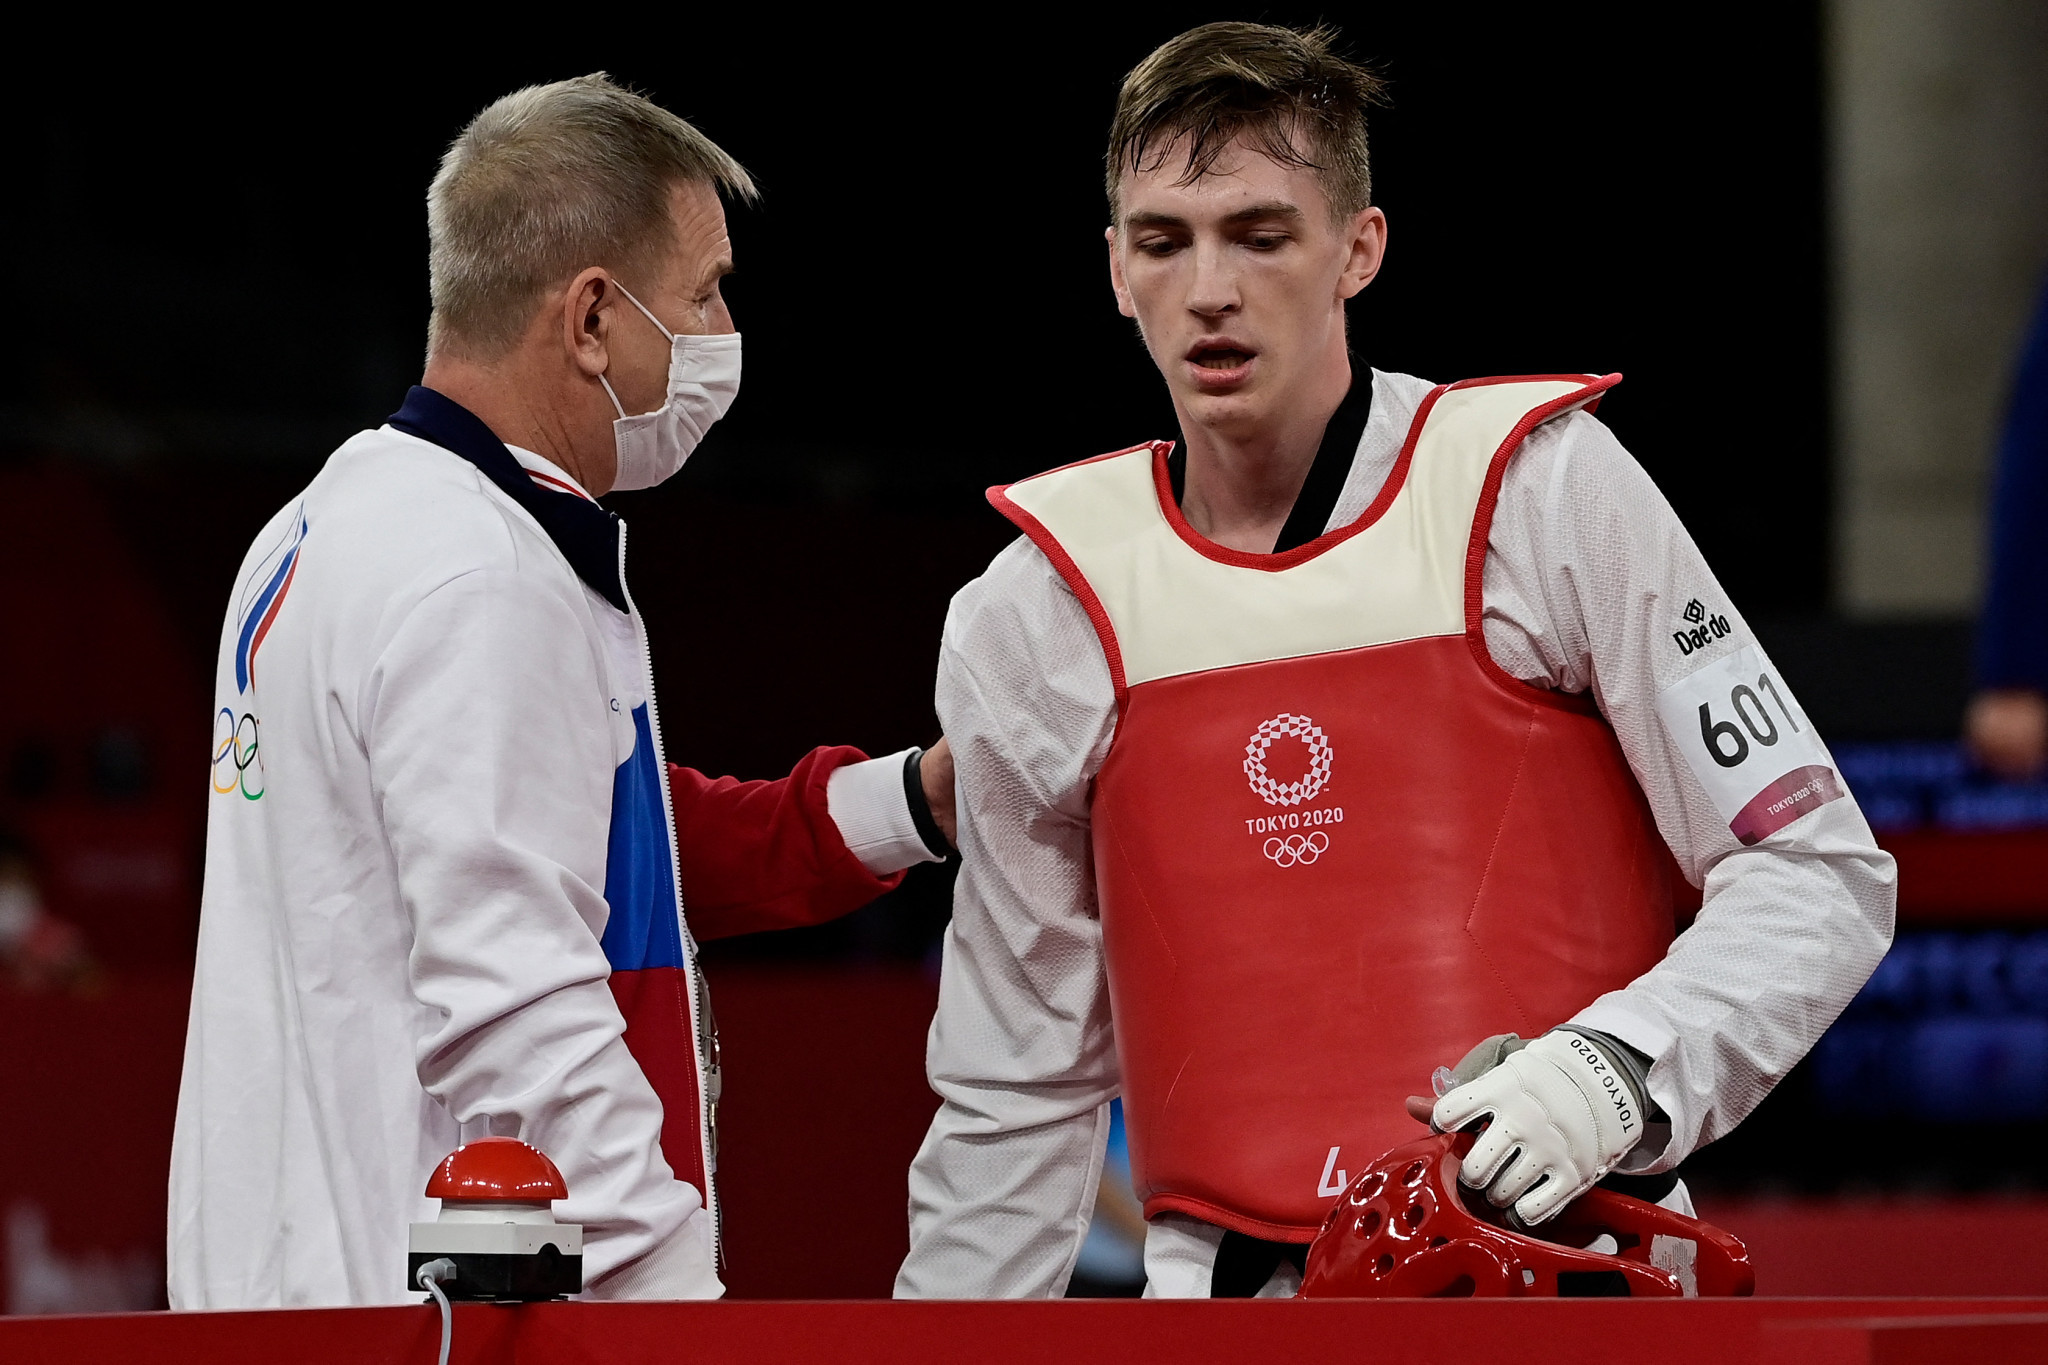 Maxim Khramtsov, pictured right, and Vladislav Larin are said to have operated outside the jurisdiction of the World Championships ©Getty Images